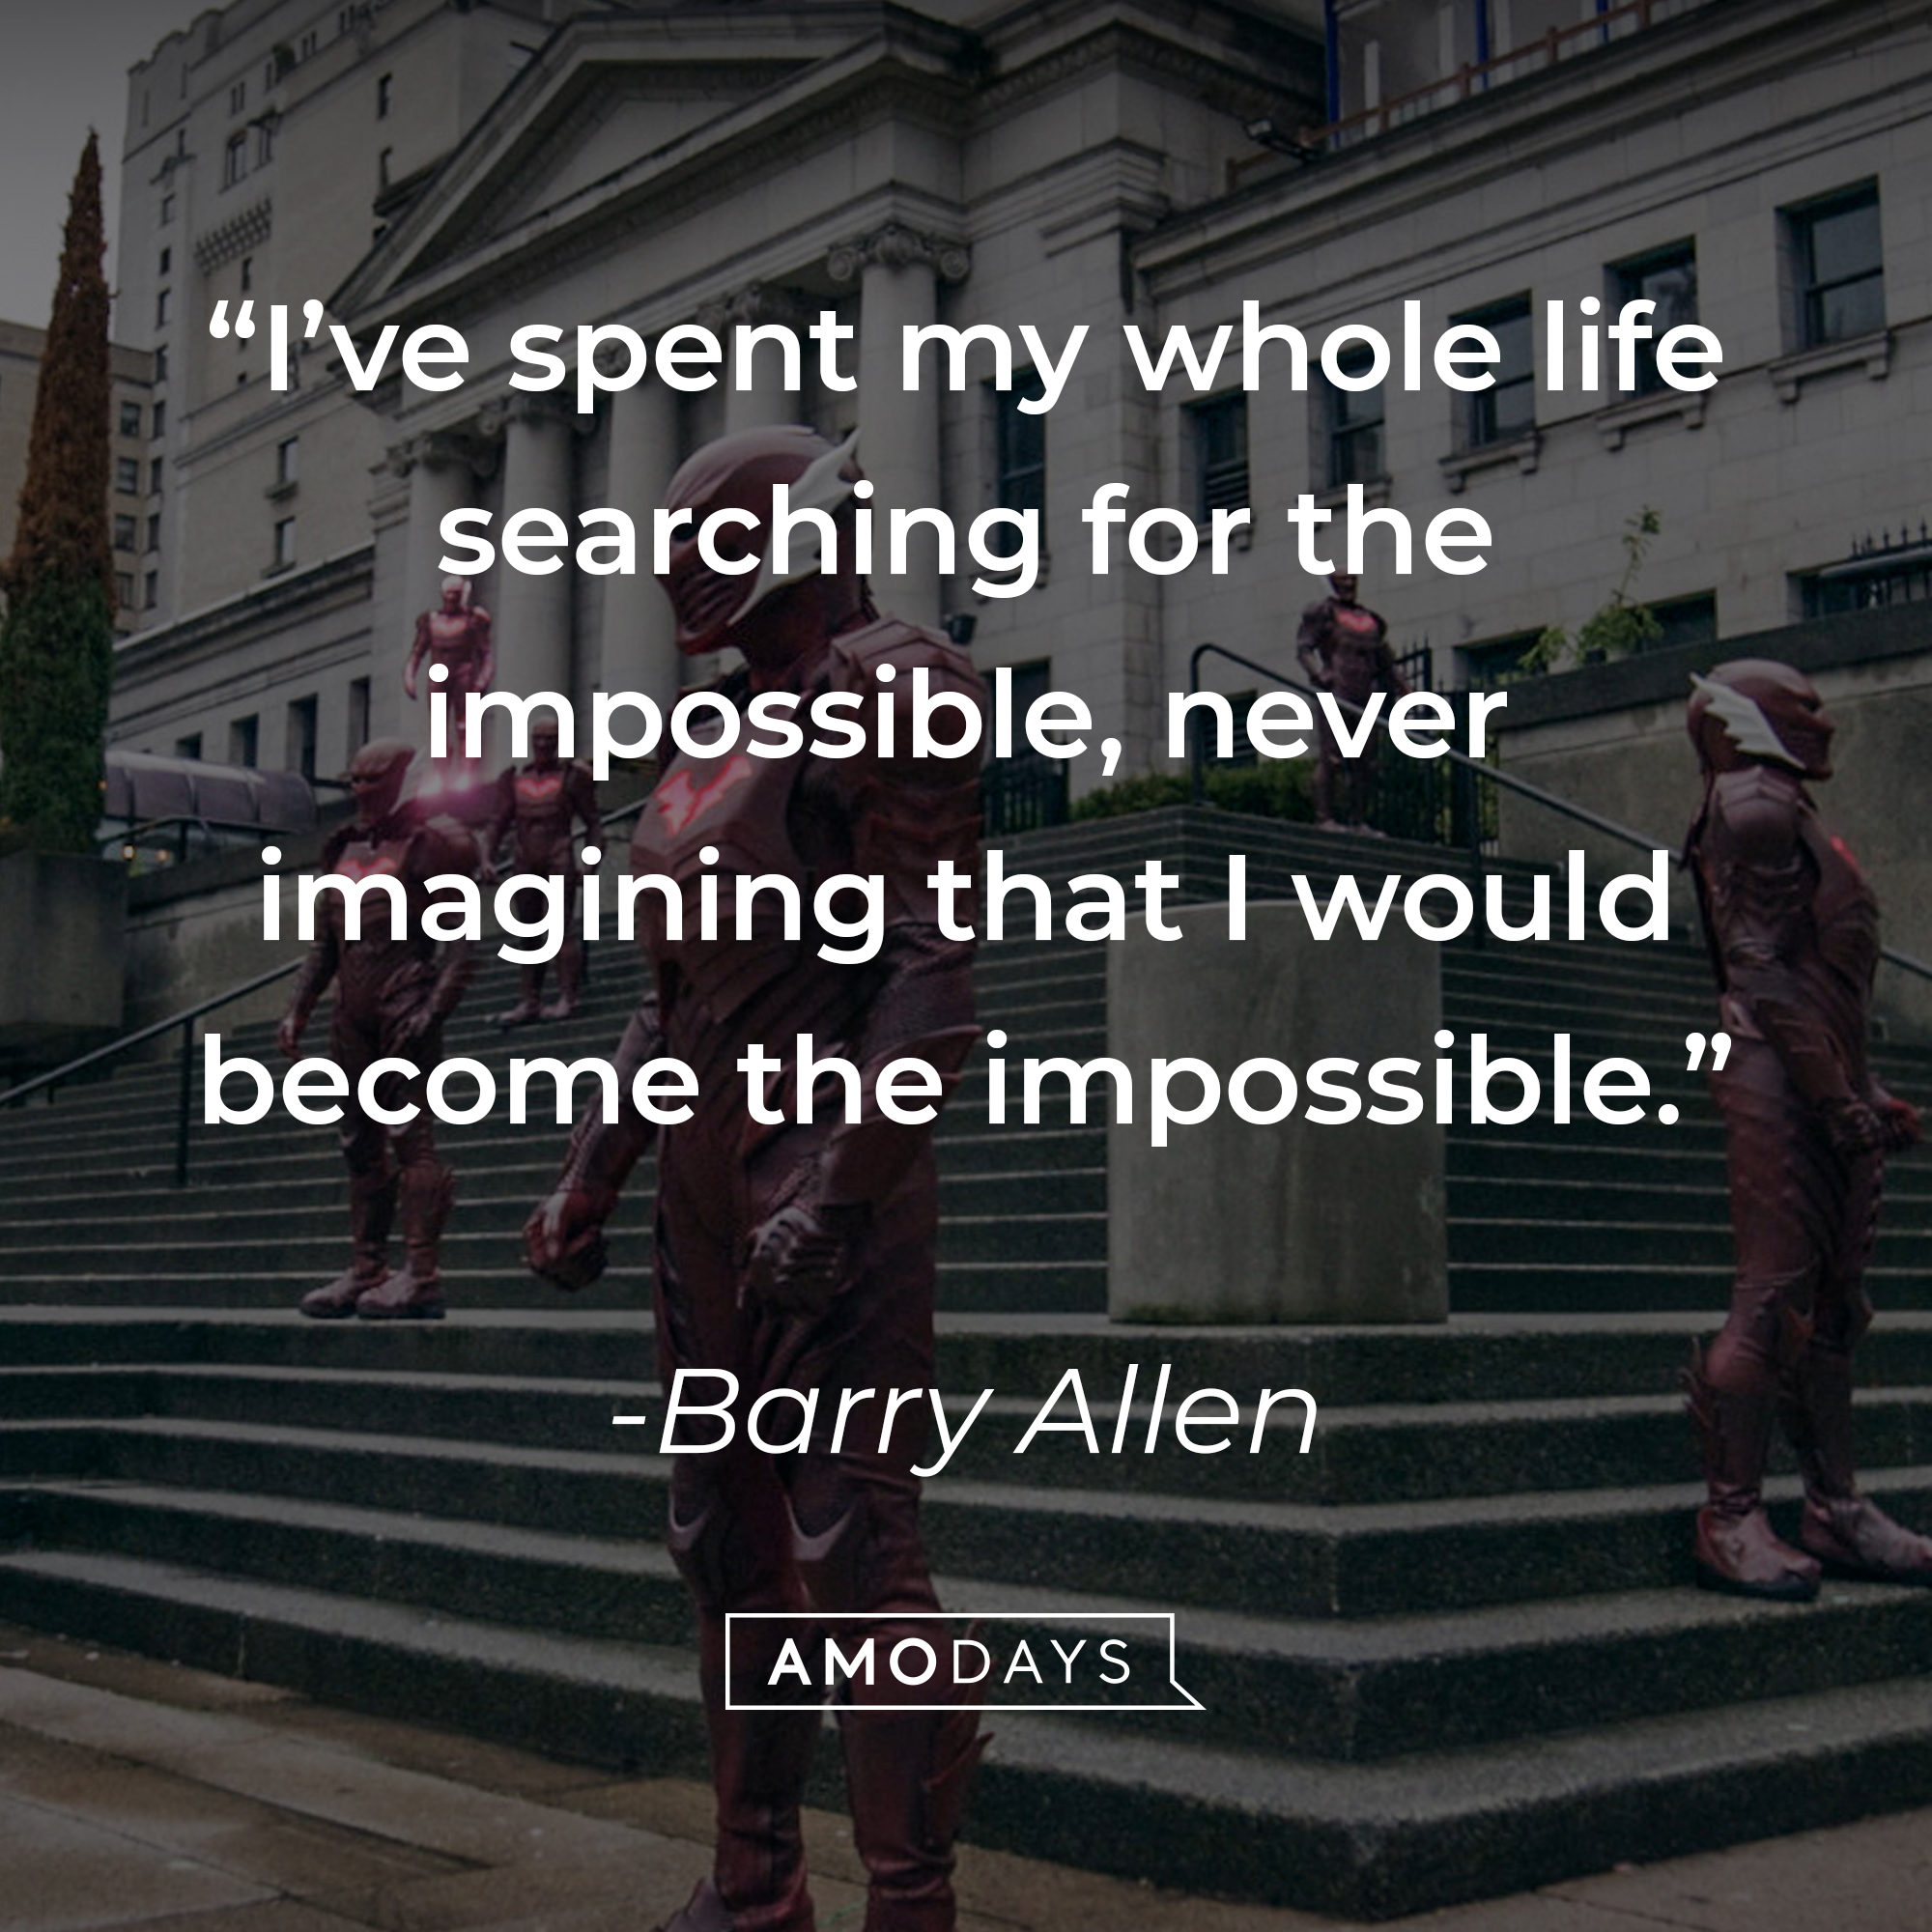 A photo from "The Flash" with the quote, "I’ve spent my whole life searching for the impossible, never imagining that I would become the impossible." | Source: Facebook/CWTheFlash